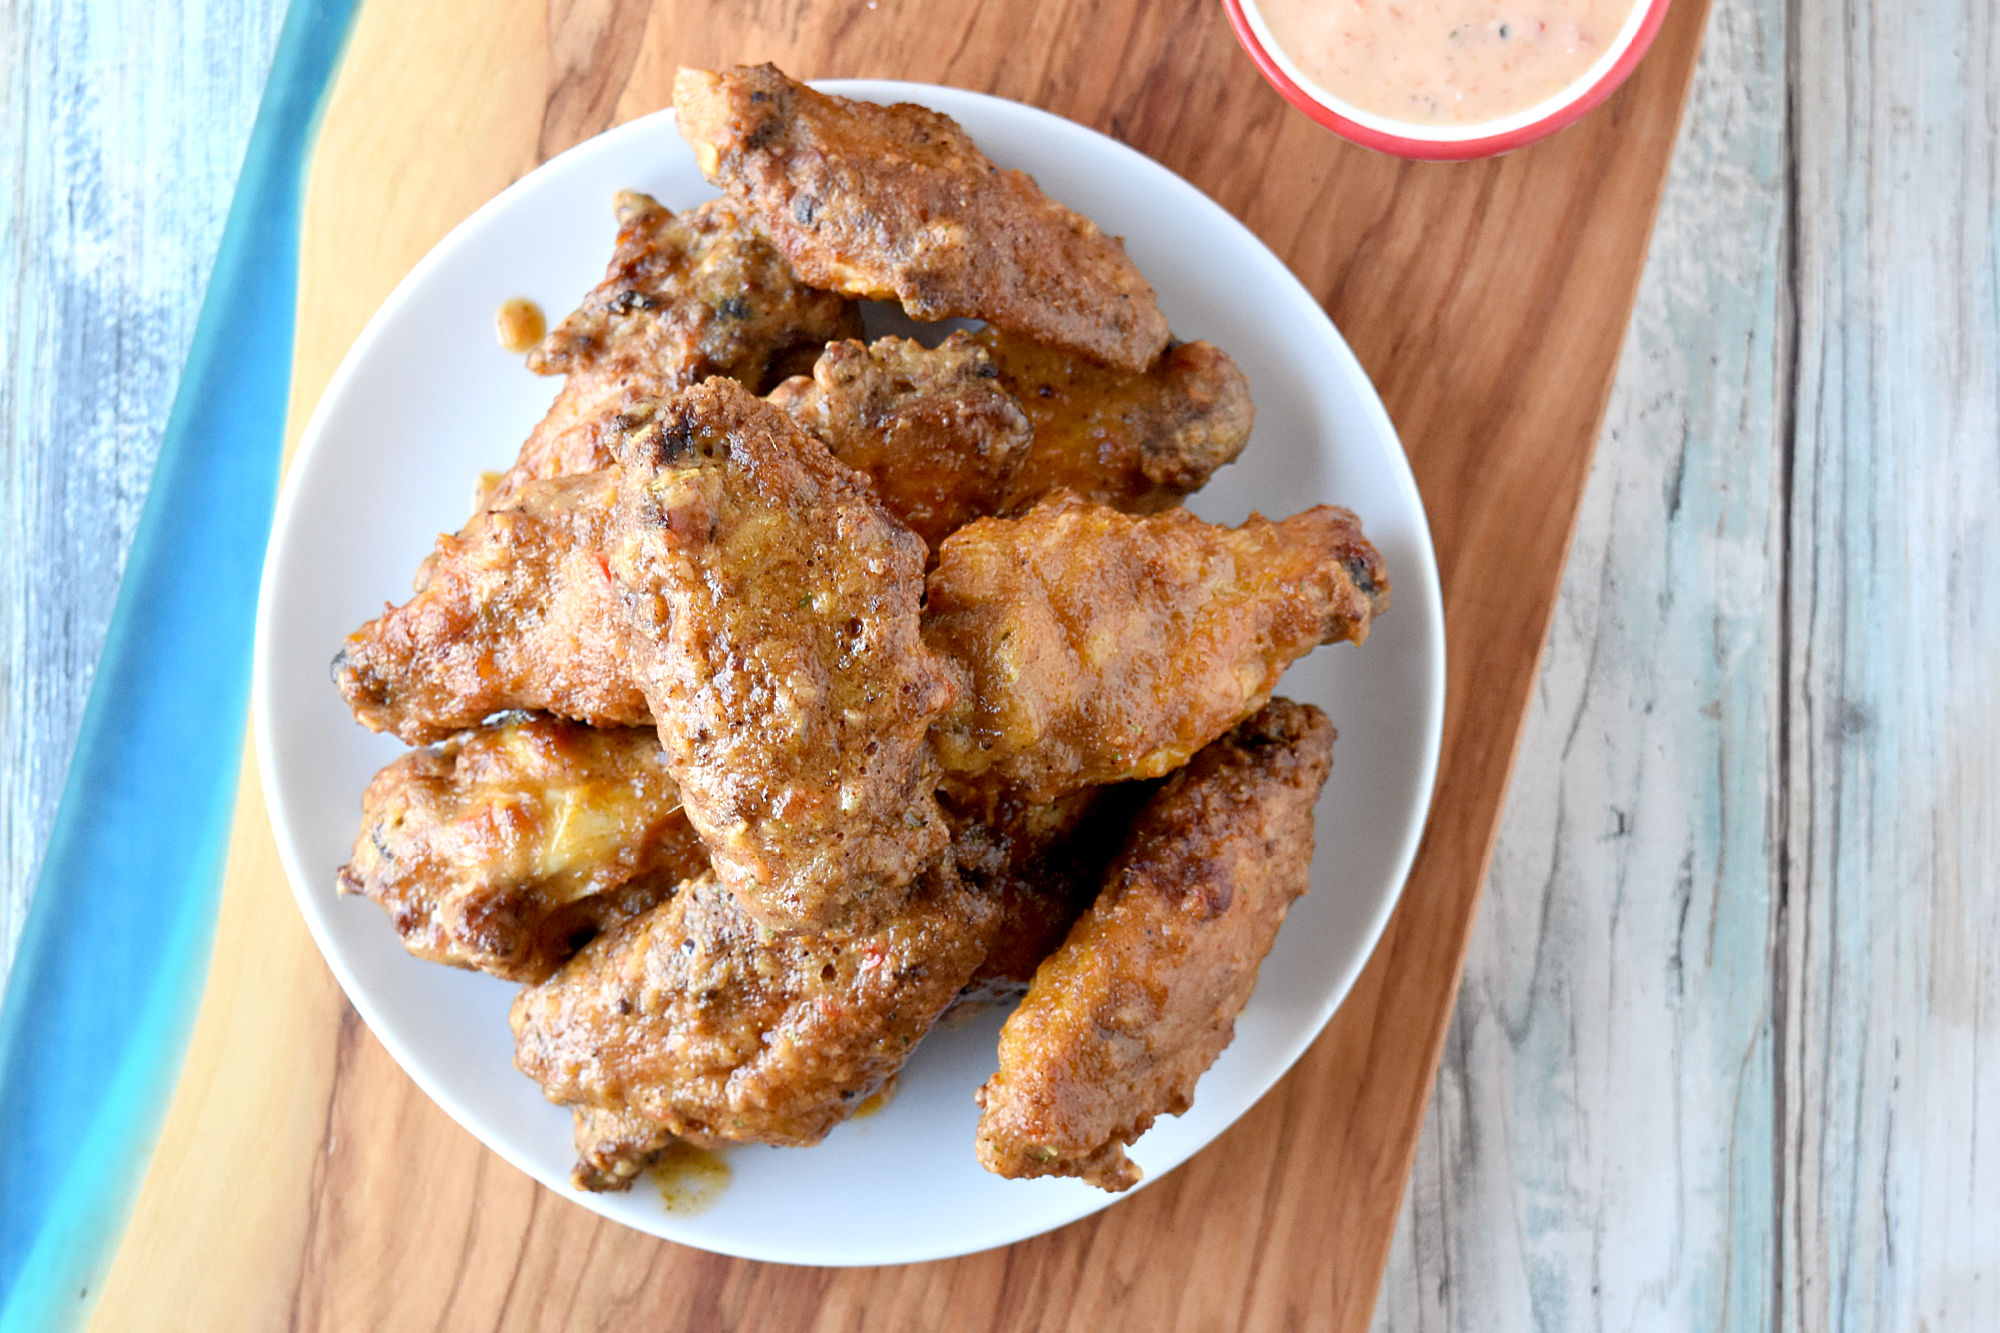 Sambal Crispy Air Fryer Wings are coated in Filipino grill spice and a secret ingredient before air frying. After cooking, they are tossed in a sambal butter sauce giving them a spicy kick. #SeriousFoodieRecipeChallenge, #SeriousFoodie, #BitesAroundTheWorld